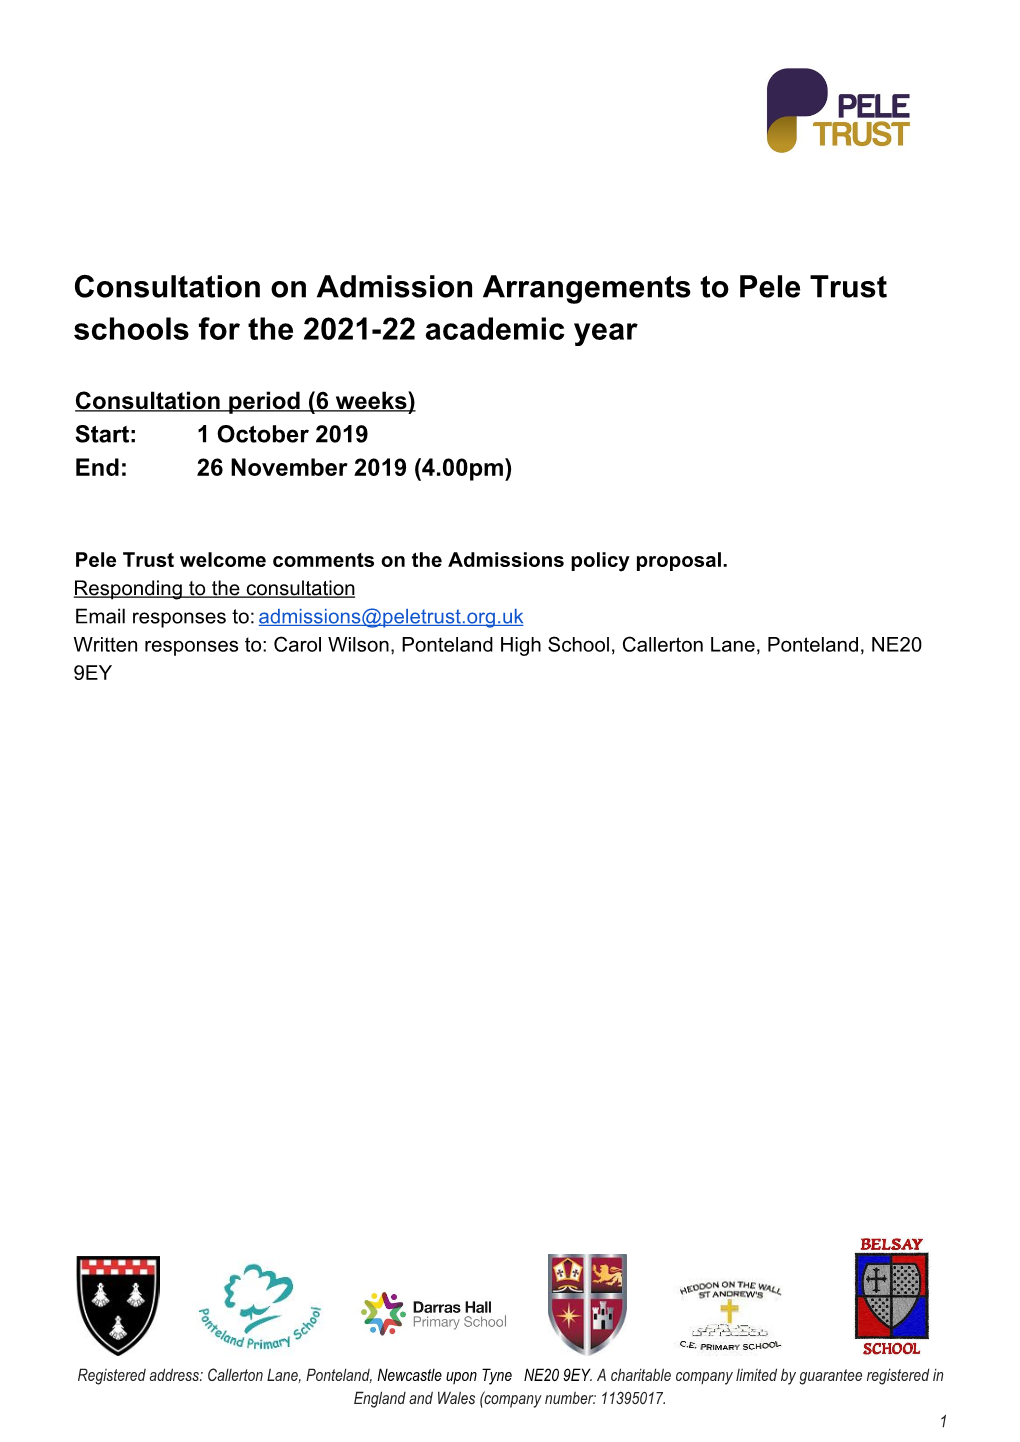 Consultation on Admission Arrangements to Pele Trust Schools for the 2021-22 Academic Year